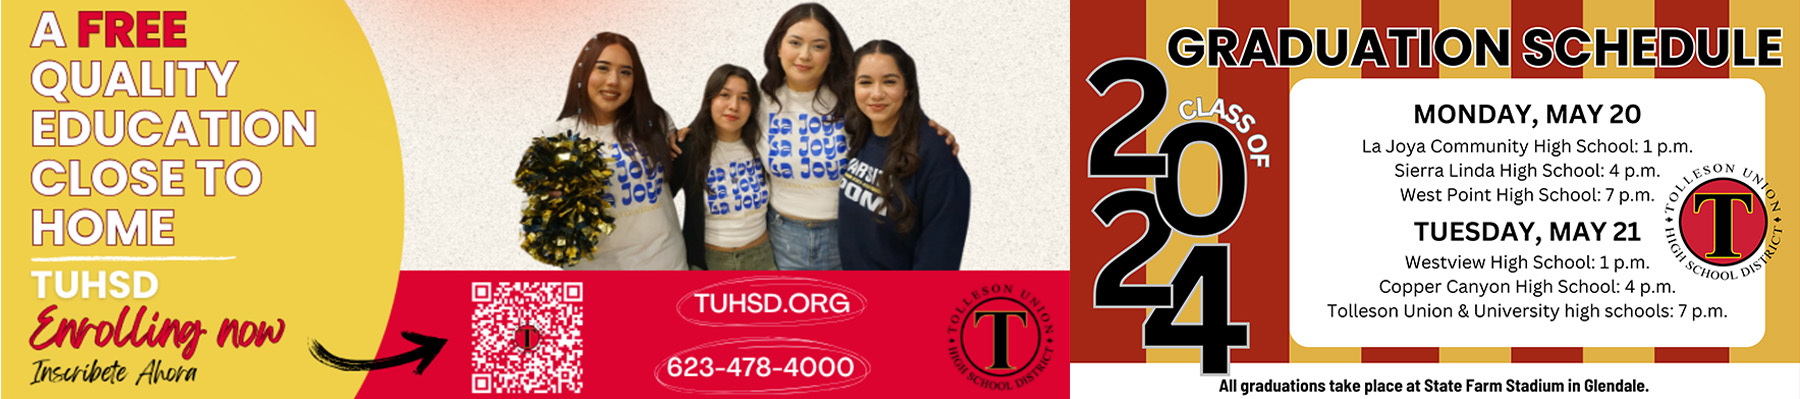 A free quality education close to home - TUHSD Enrolling now | Inscribete Ahora - tuhsd.org - 623-478-4000 | Graduation Schedule